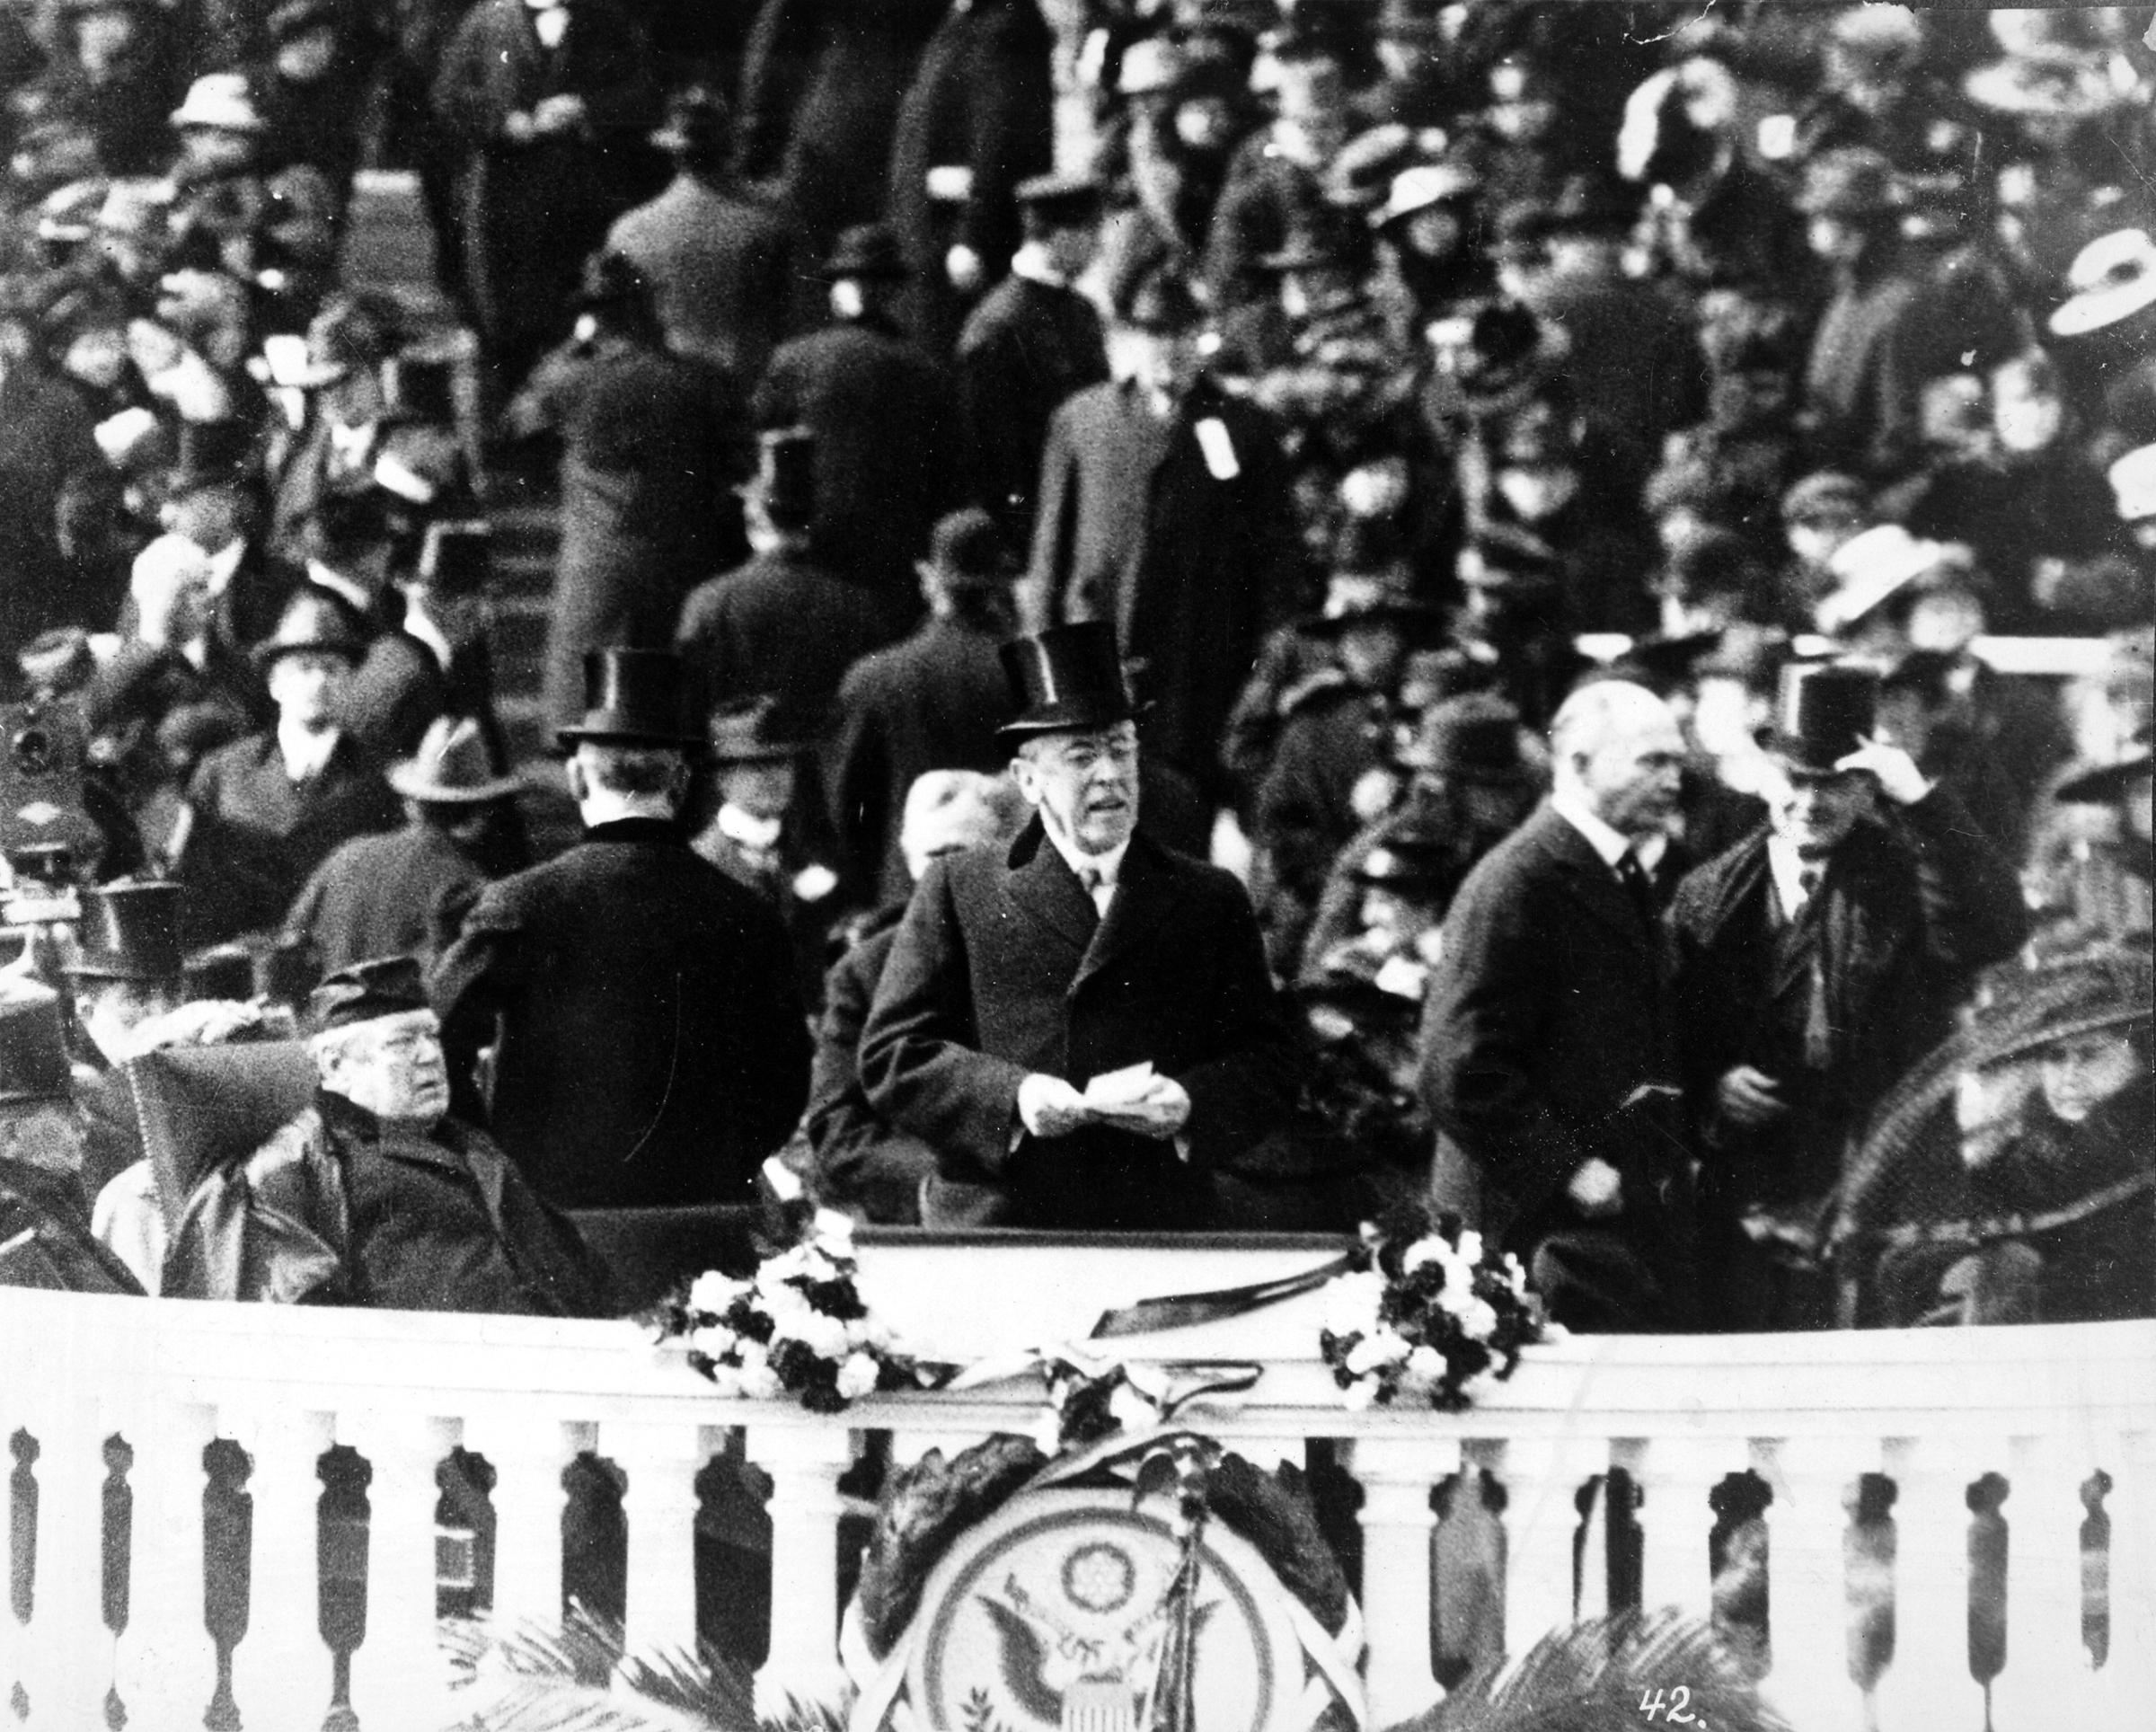 President Woodrow Wilson, with top hat and speech in hand, delivering his inaugural address, March 5, 1917.